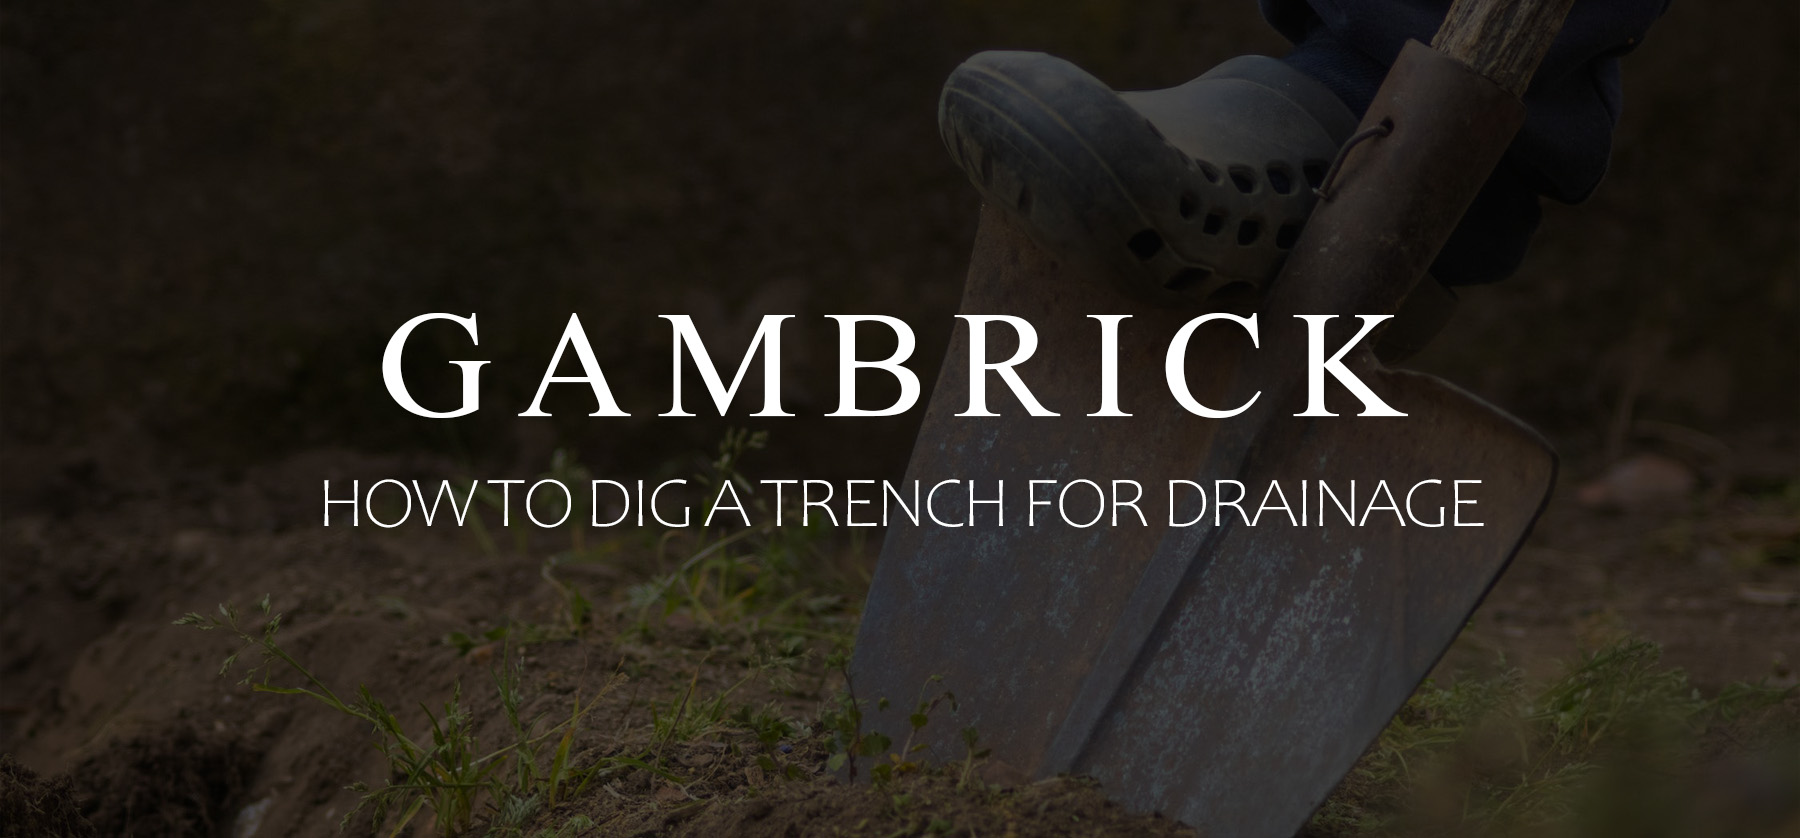 how to dig a trench for drainage banner 1.0